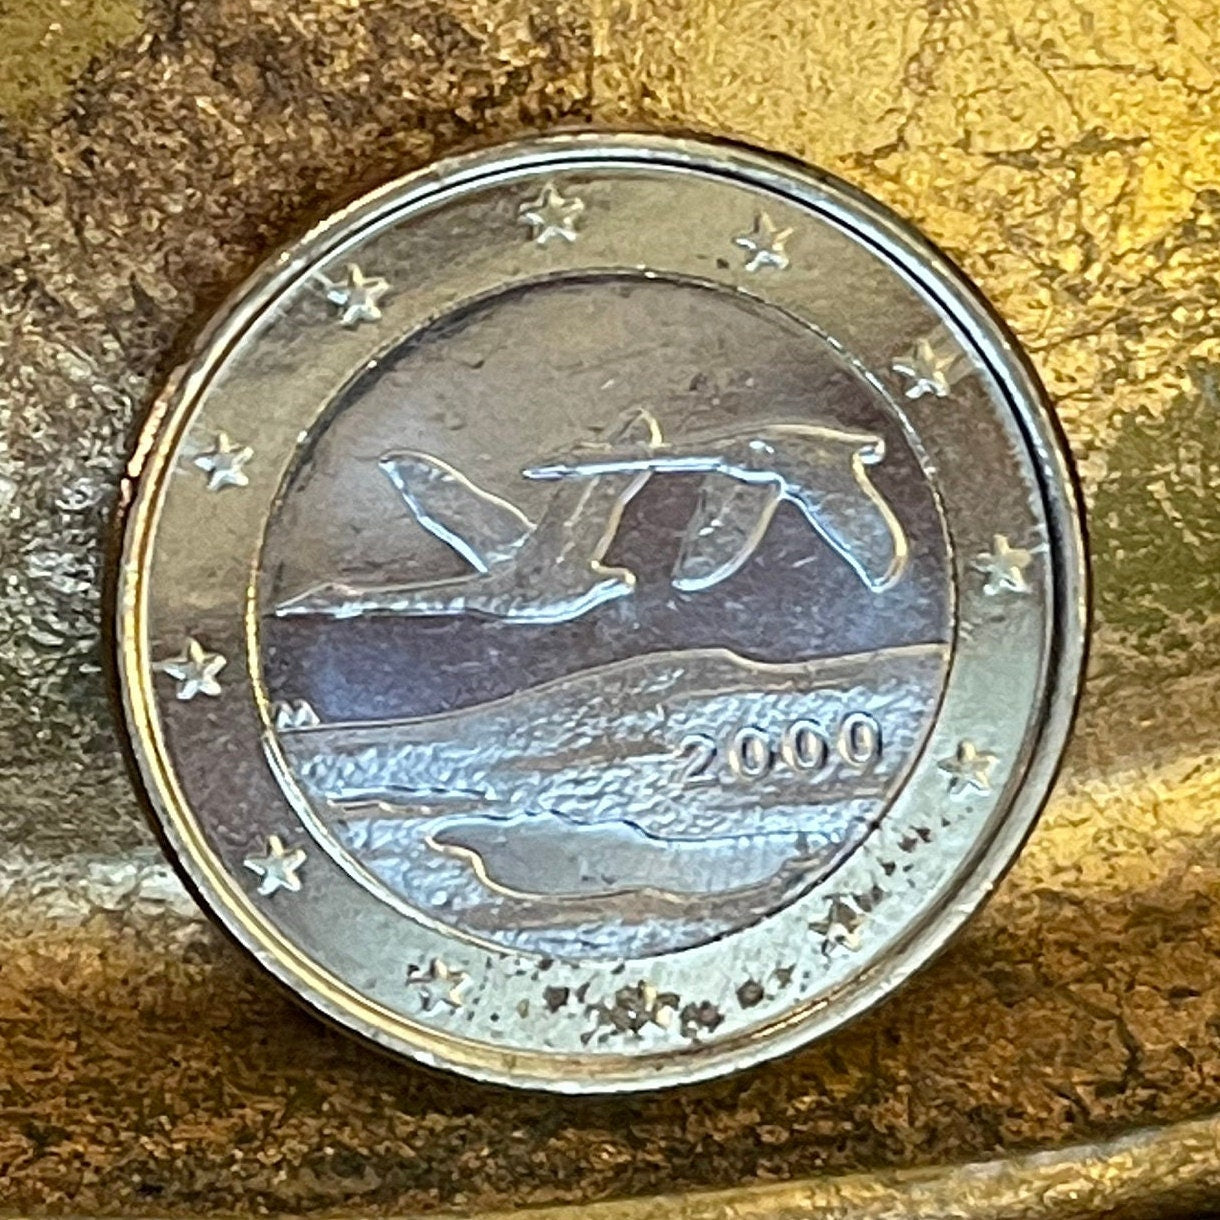 Whooper Swans 1 Euro Finland Authentic Coin Money for Jewelry and Craft Making (Trumpeter Swan) (Swan Song) (Wild Swan) (Bimetallic)